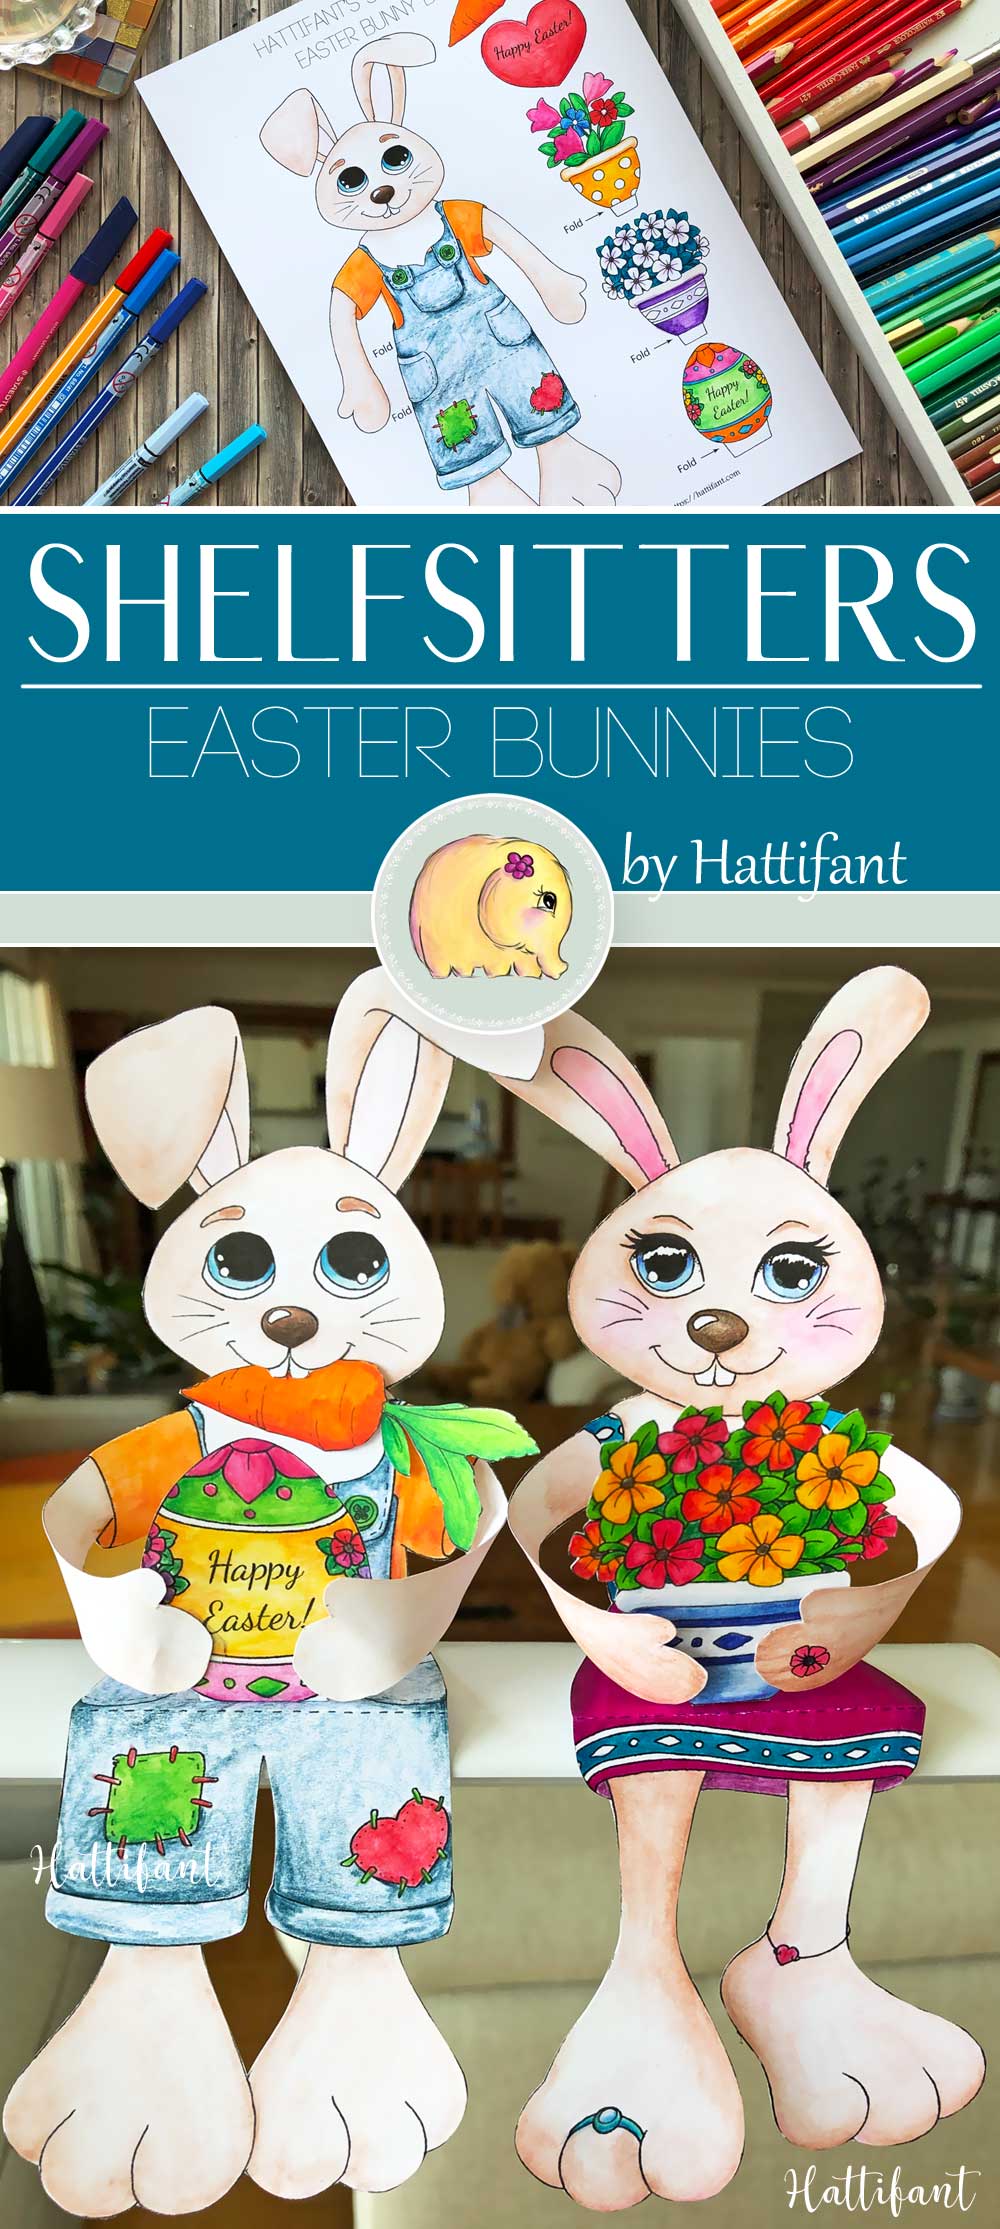 Hattifant's Easter Bunny Shelf Sitters to color